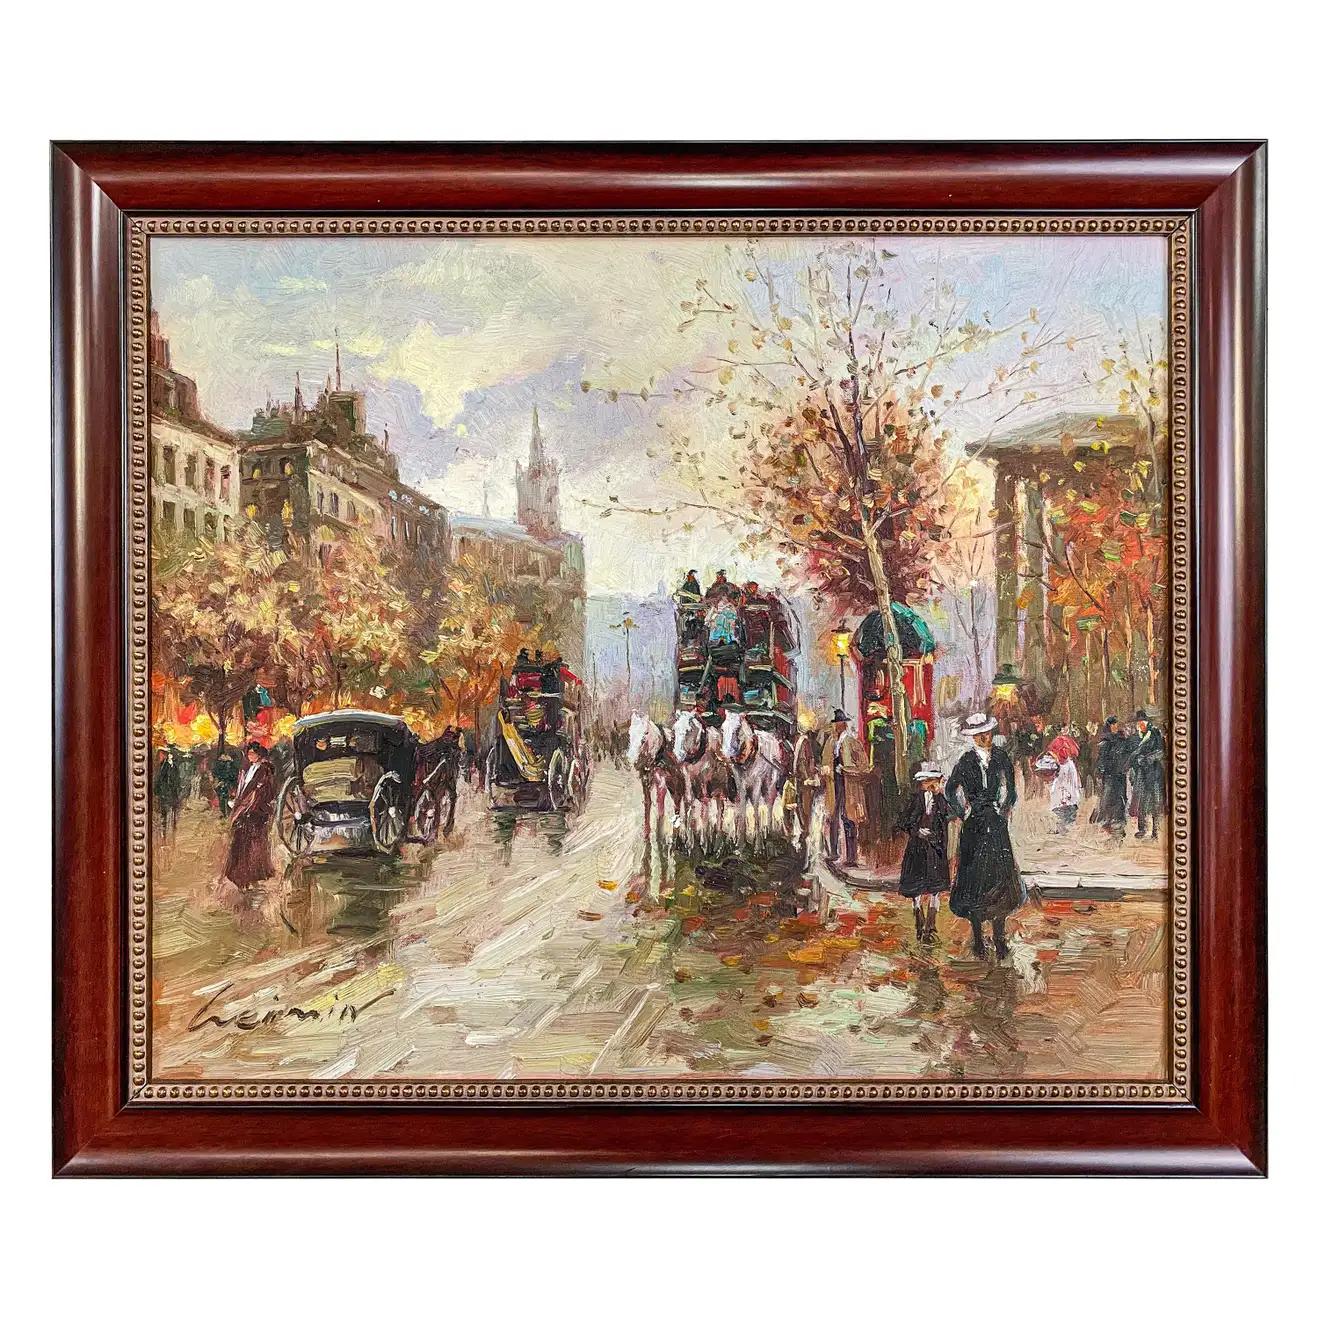 Leimin Landscape Painting - Mid Century Cityscape Oil on Canvas Painting, Framed and Signed